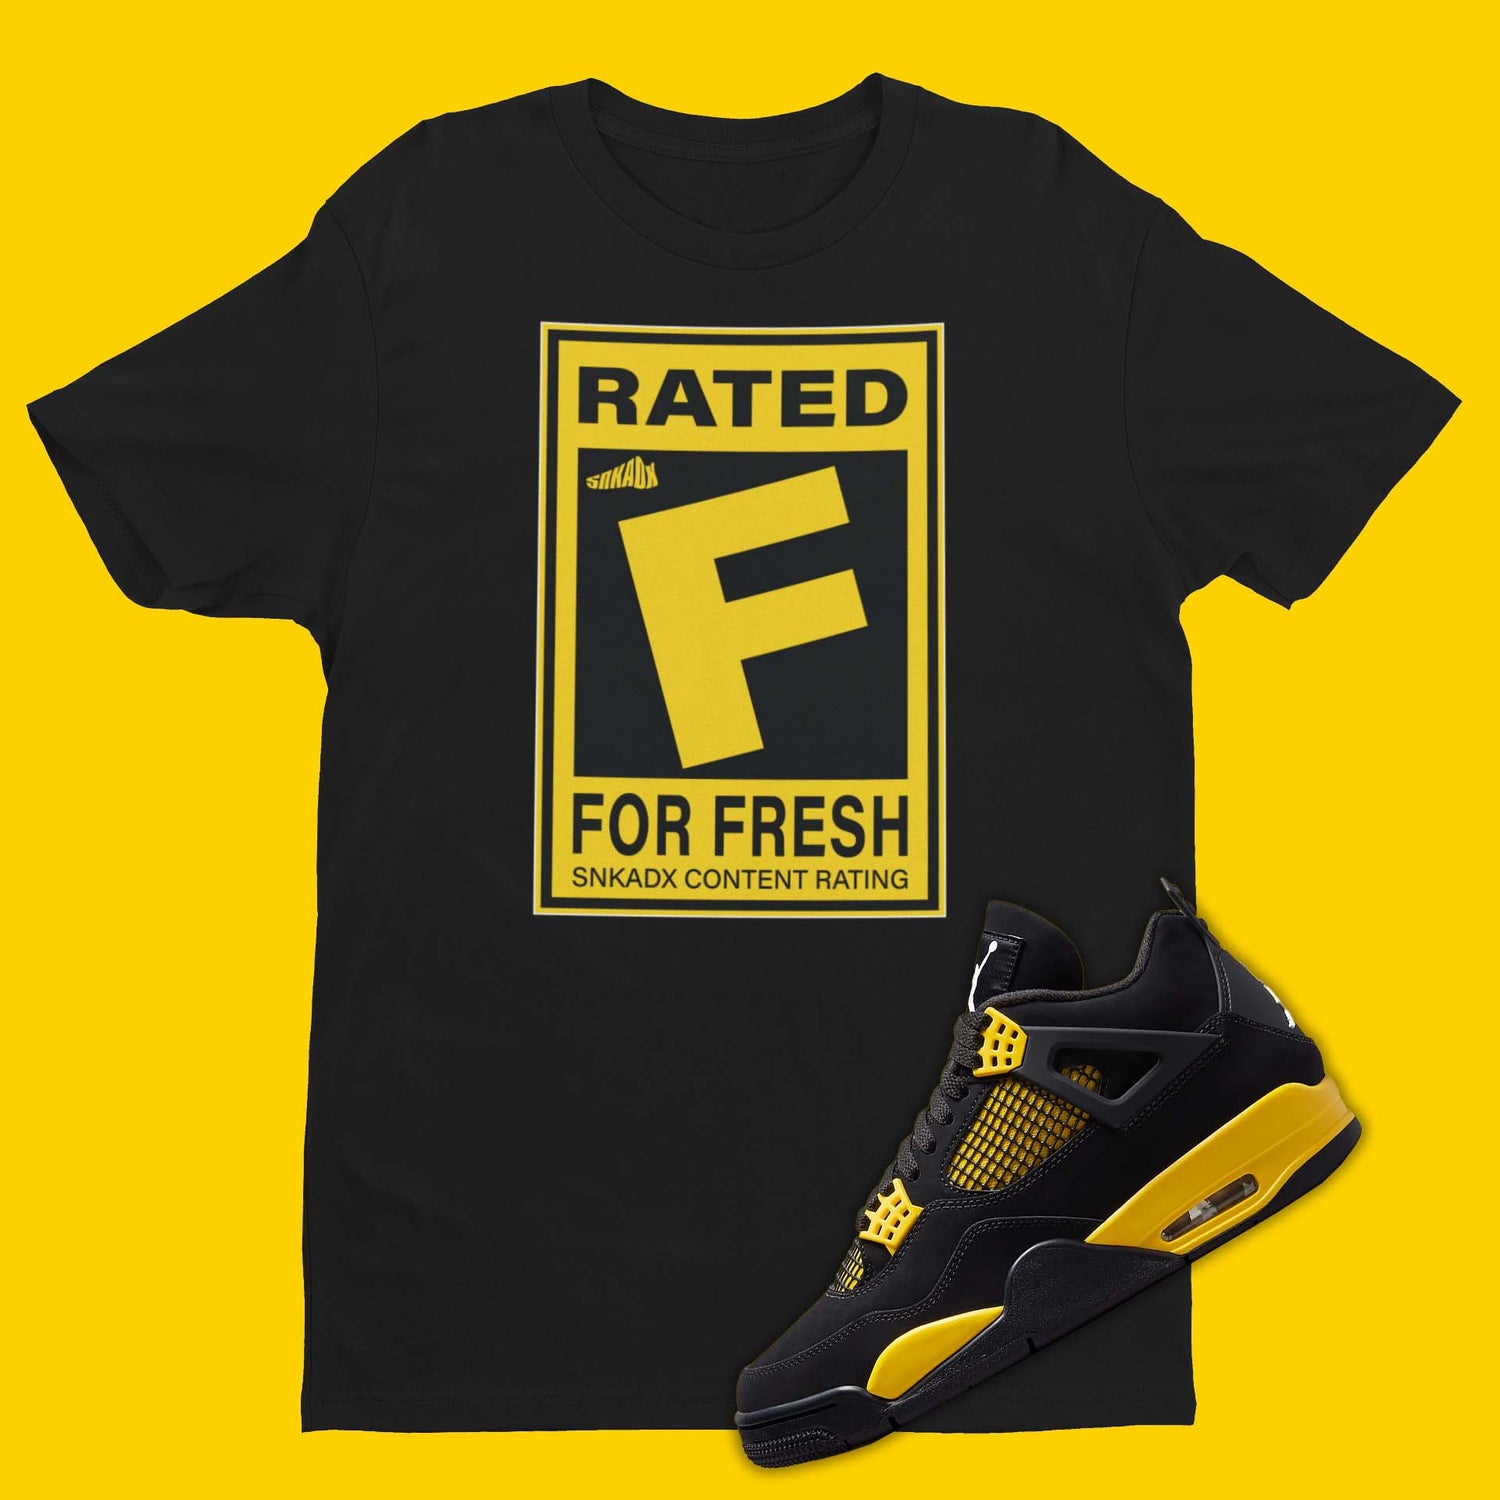 Rated F For Fresh Air Jordan 4 Thunder Matching Shirt in black with video game rating on front